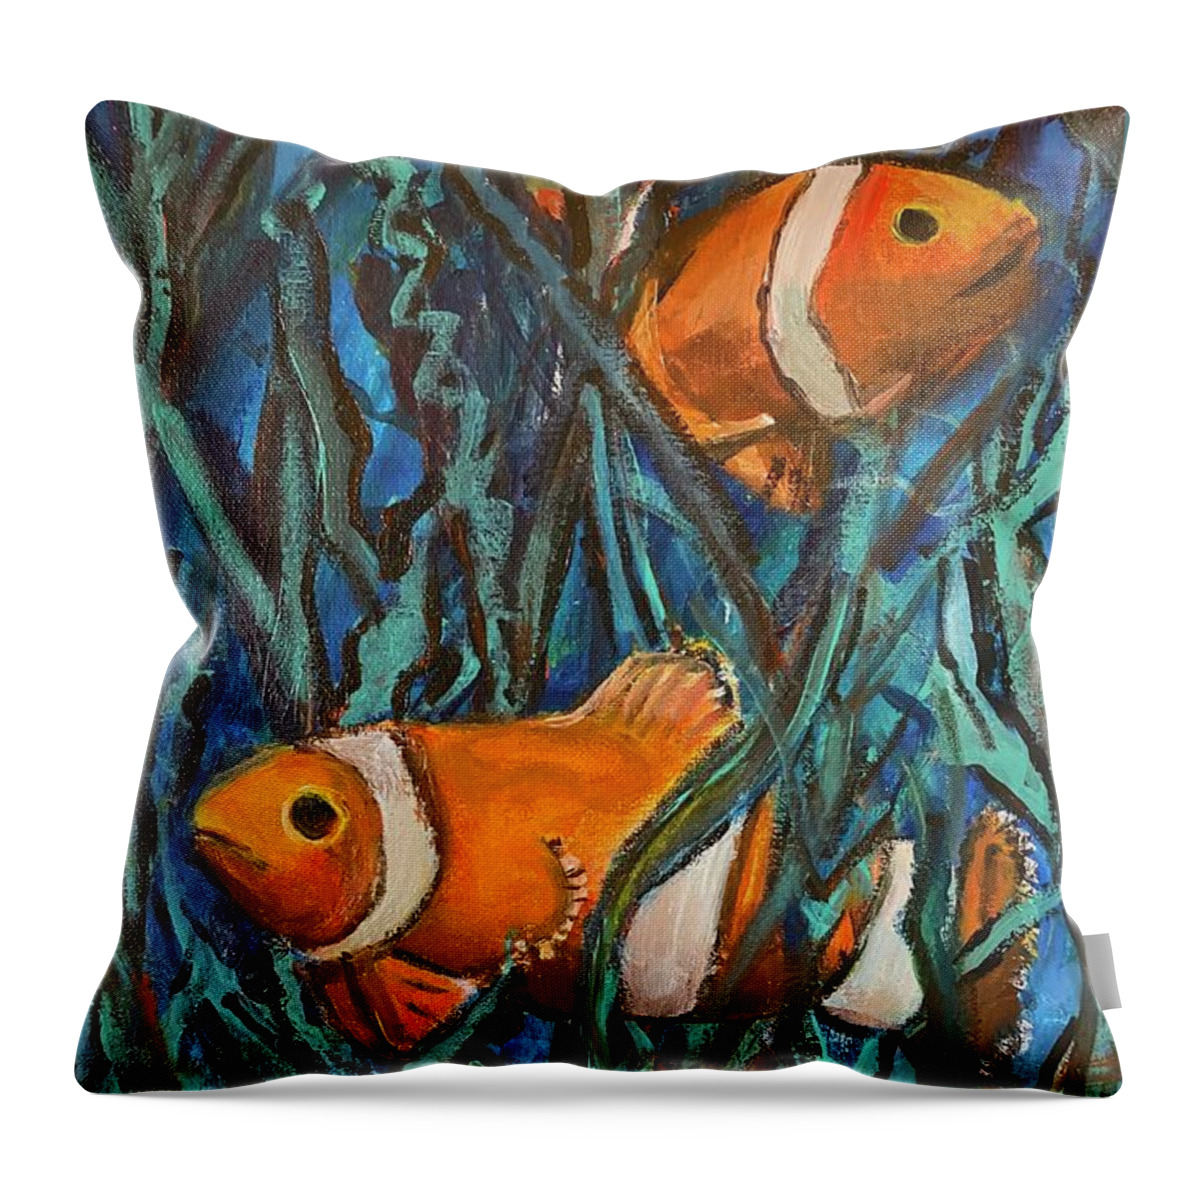 Fish Swim Water Choice Path Decisions Throw Pillow featuring the painting Choosing Own Path by Kathy Bee